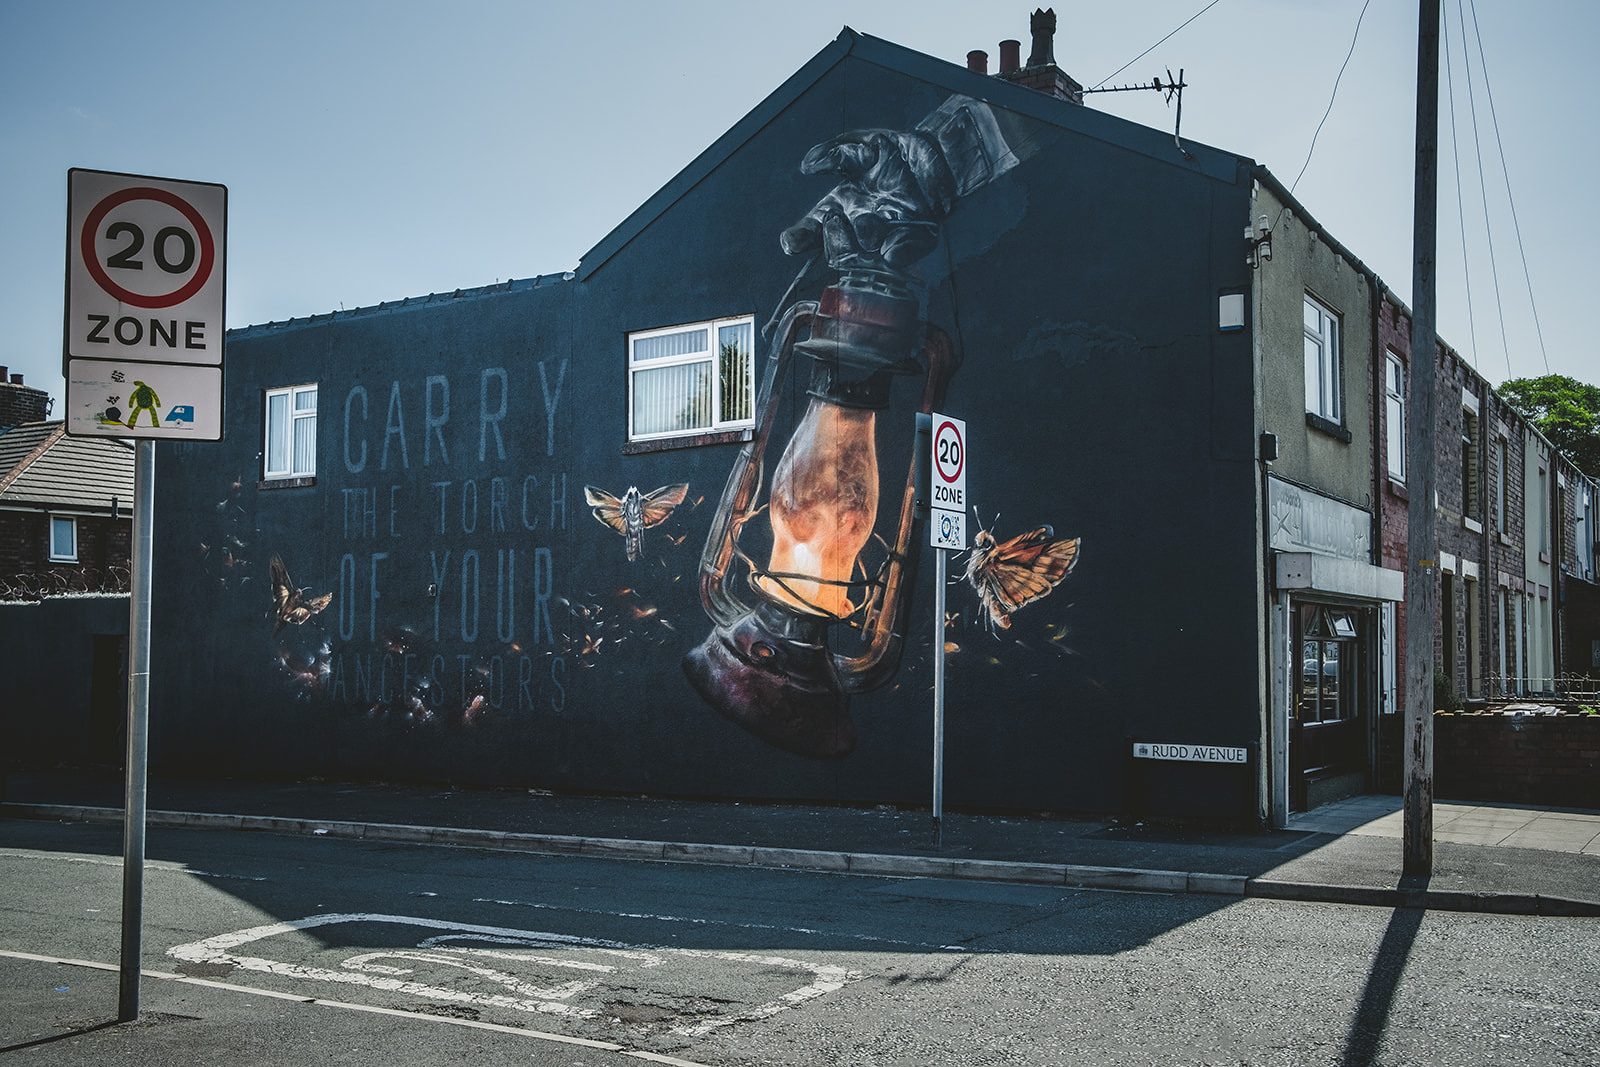 We Follow The Light mural by Nomad Clan. A large wall is painted with a mural depicting a gloved hand holding an old industrial lamp. The lamp glows orange and attracts moths towards it. To the side of this image are the words 'Carry the torch of your ancestors'